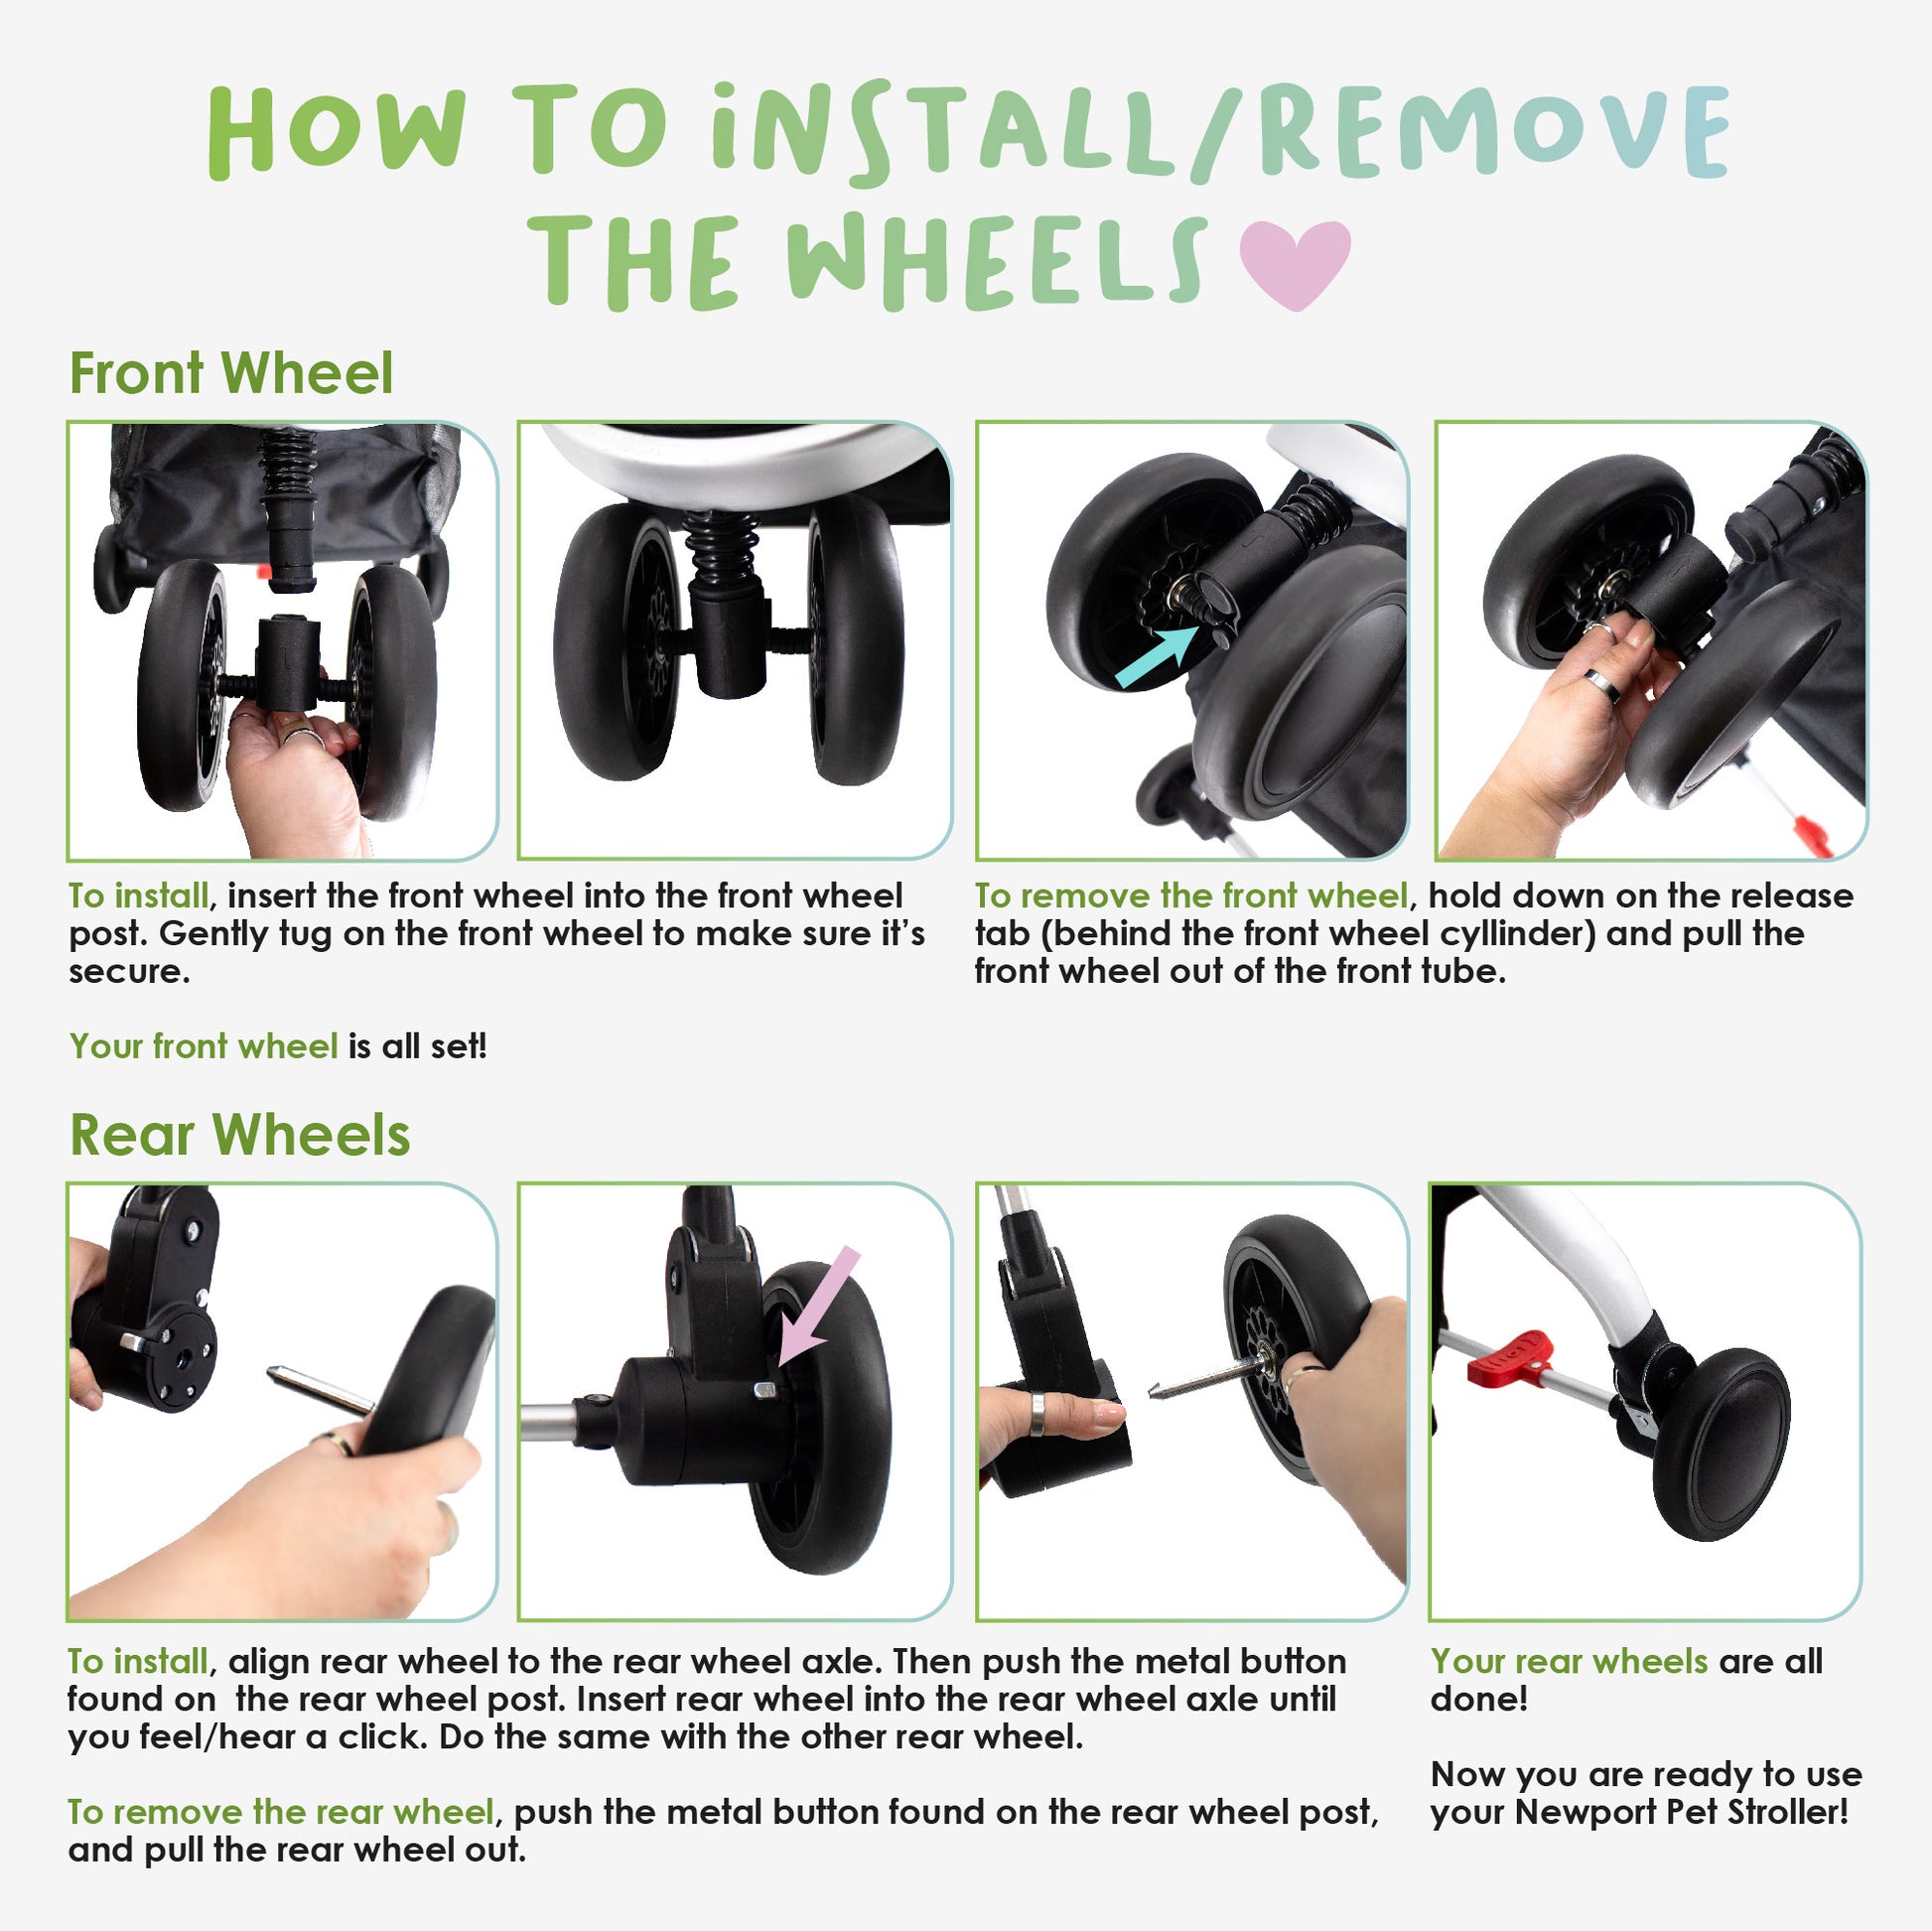 newport pet stroller how to install and remove wheels